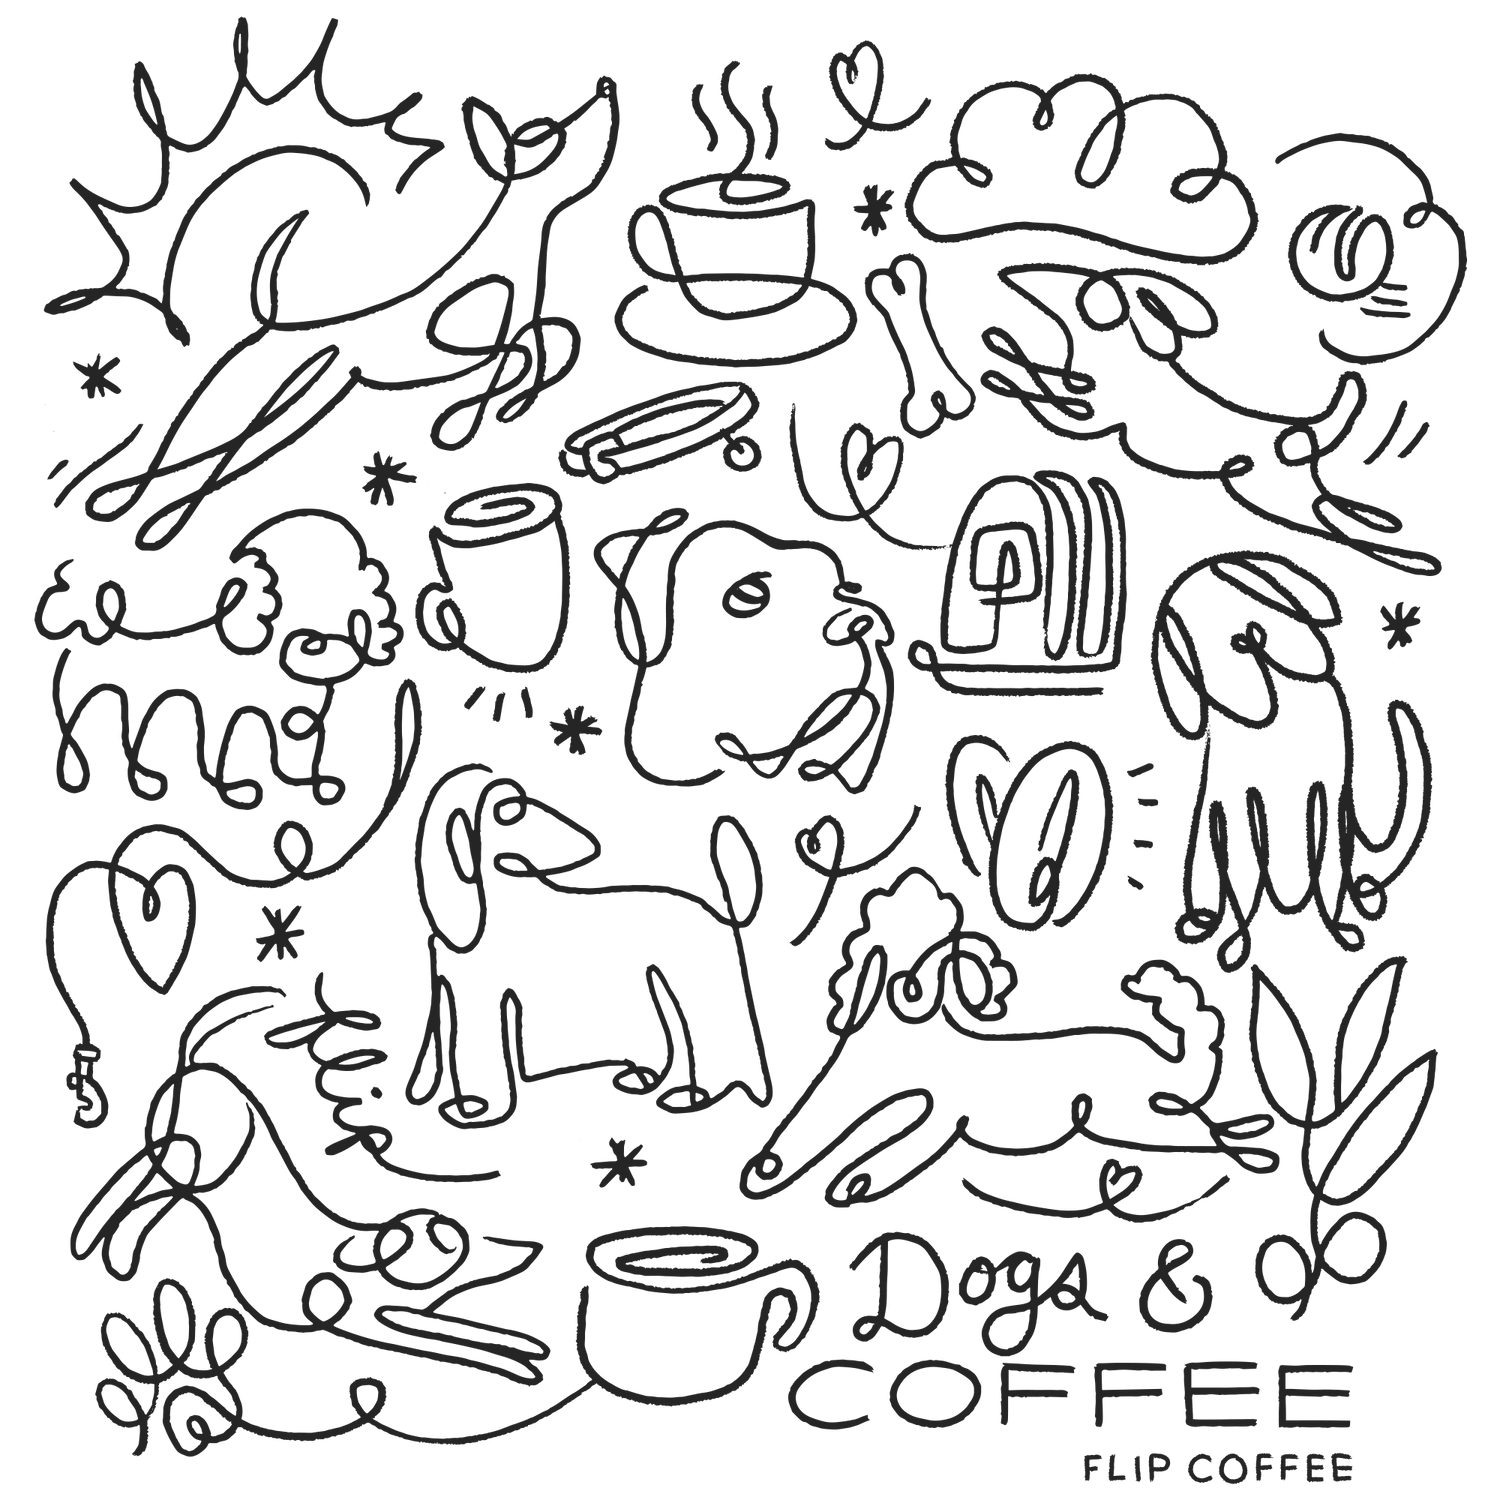 DOGS &amp; COFFEE- Unisex t-shirt / Solid Light